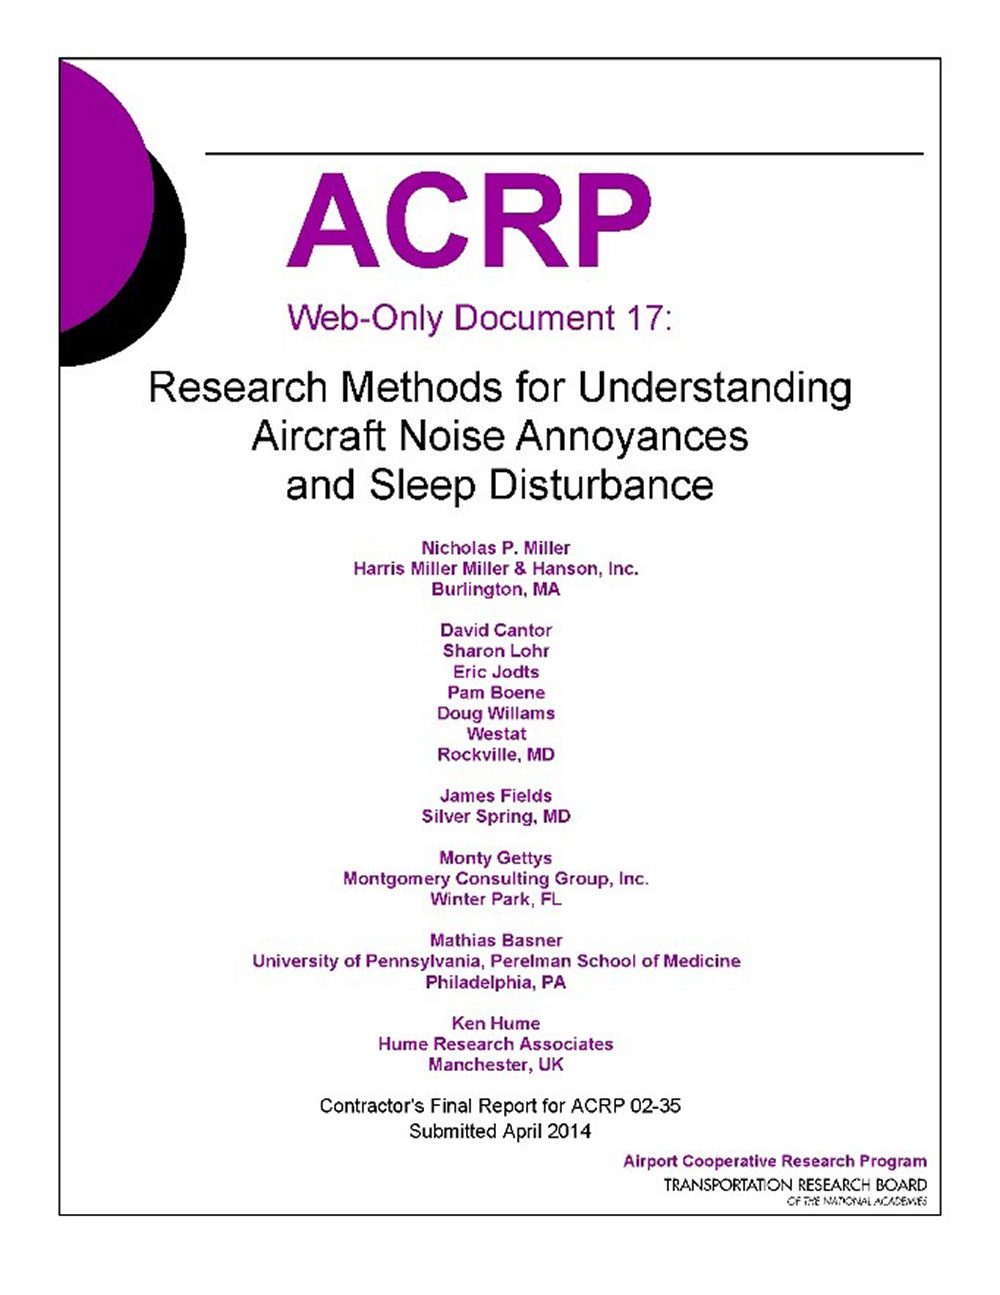 ACRP 02-35: Research Methods for Understanding Aircraft Noise Annoyance and Sleep Disturbance